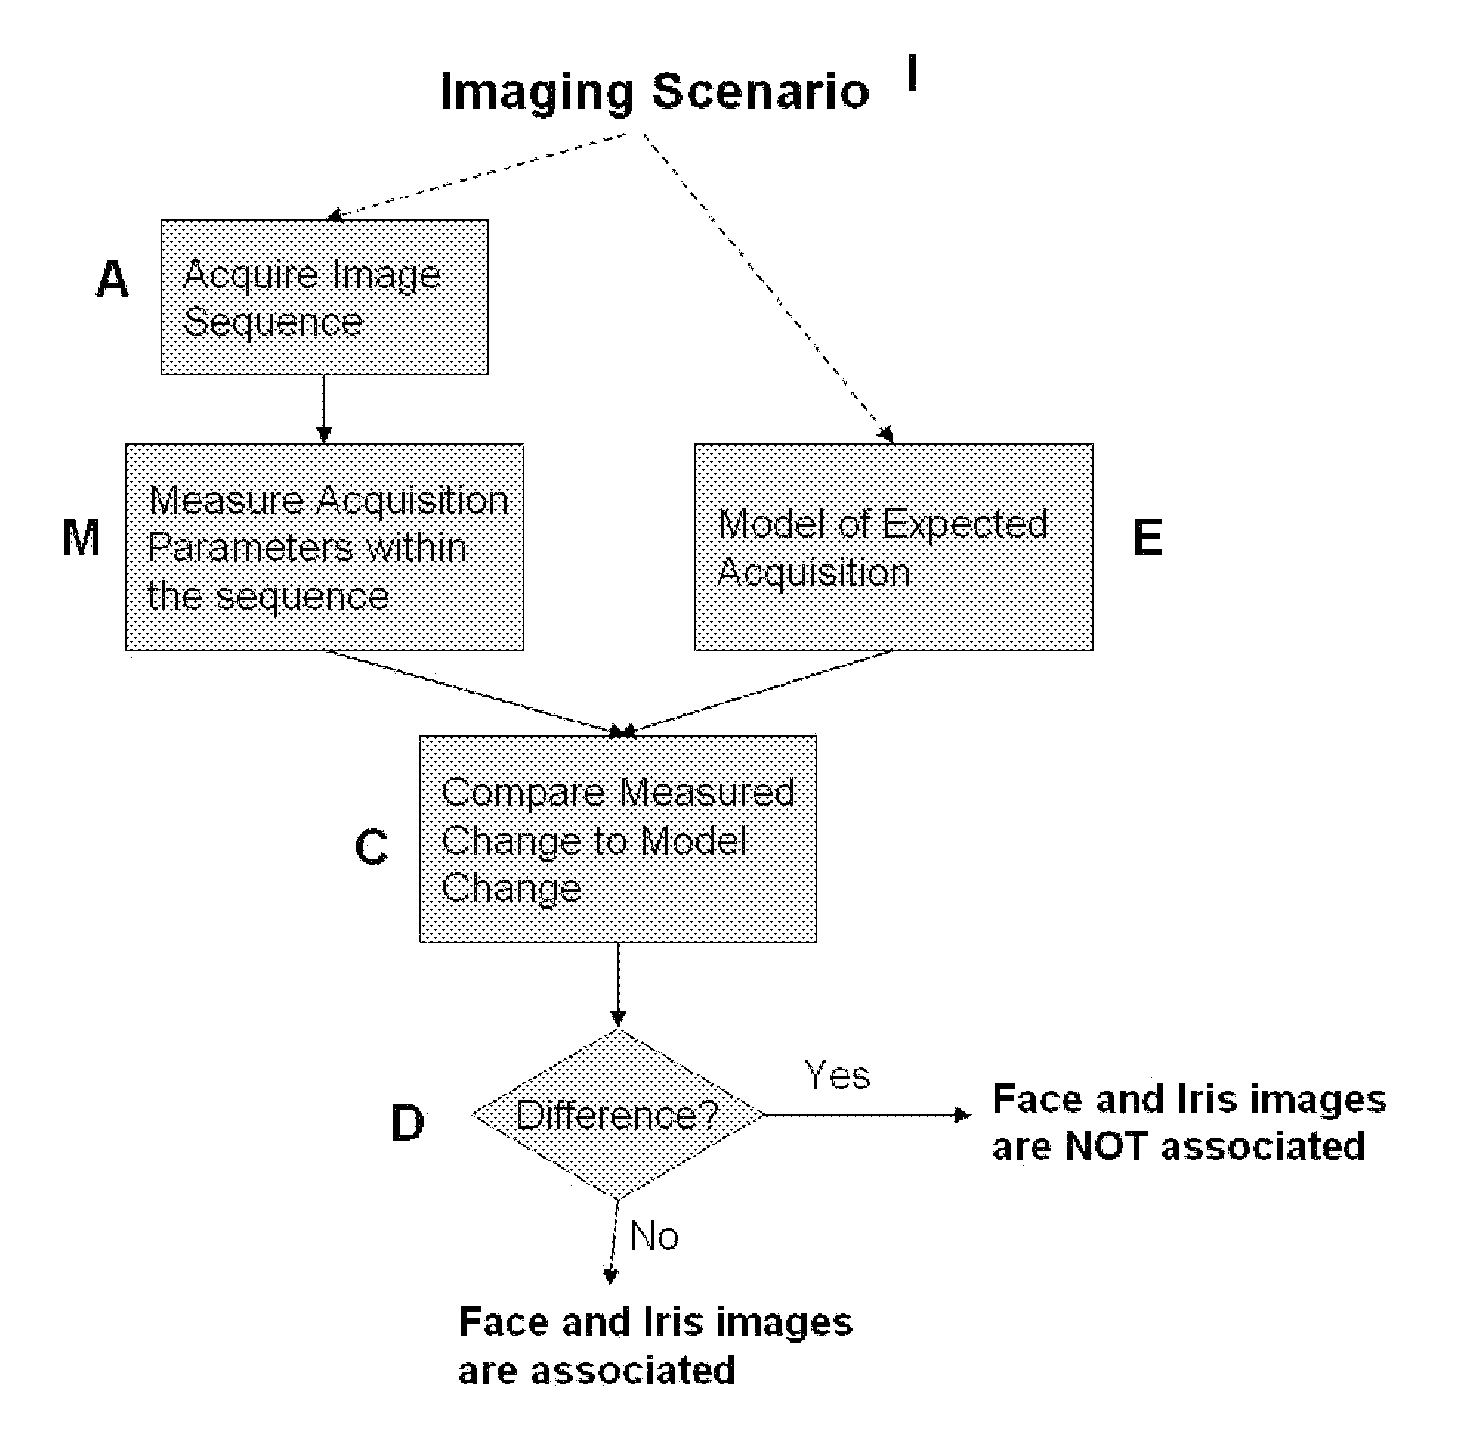 Methods for performing biometric recognition of a human eye and corroboration of same